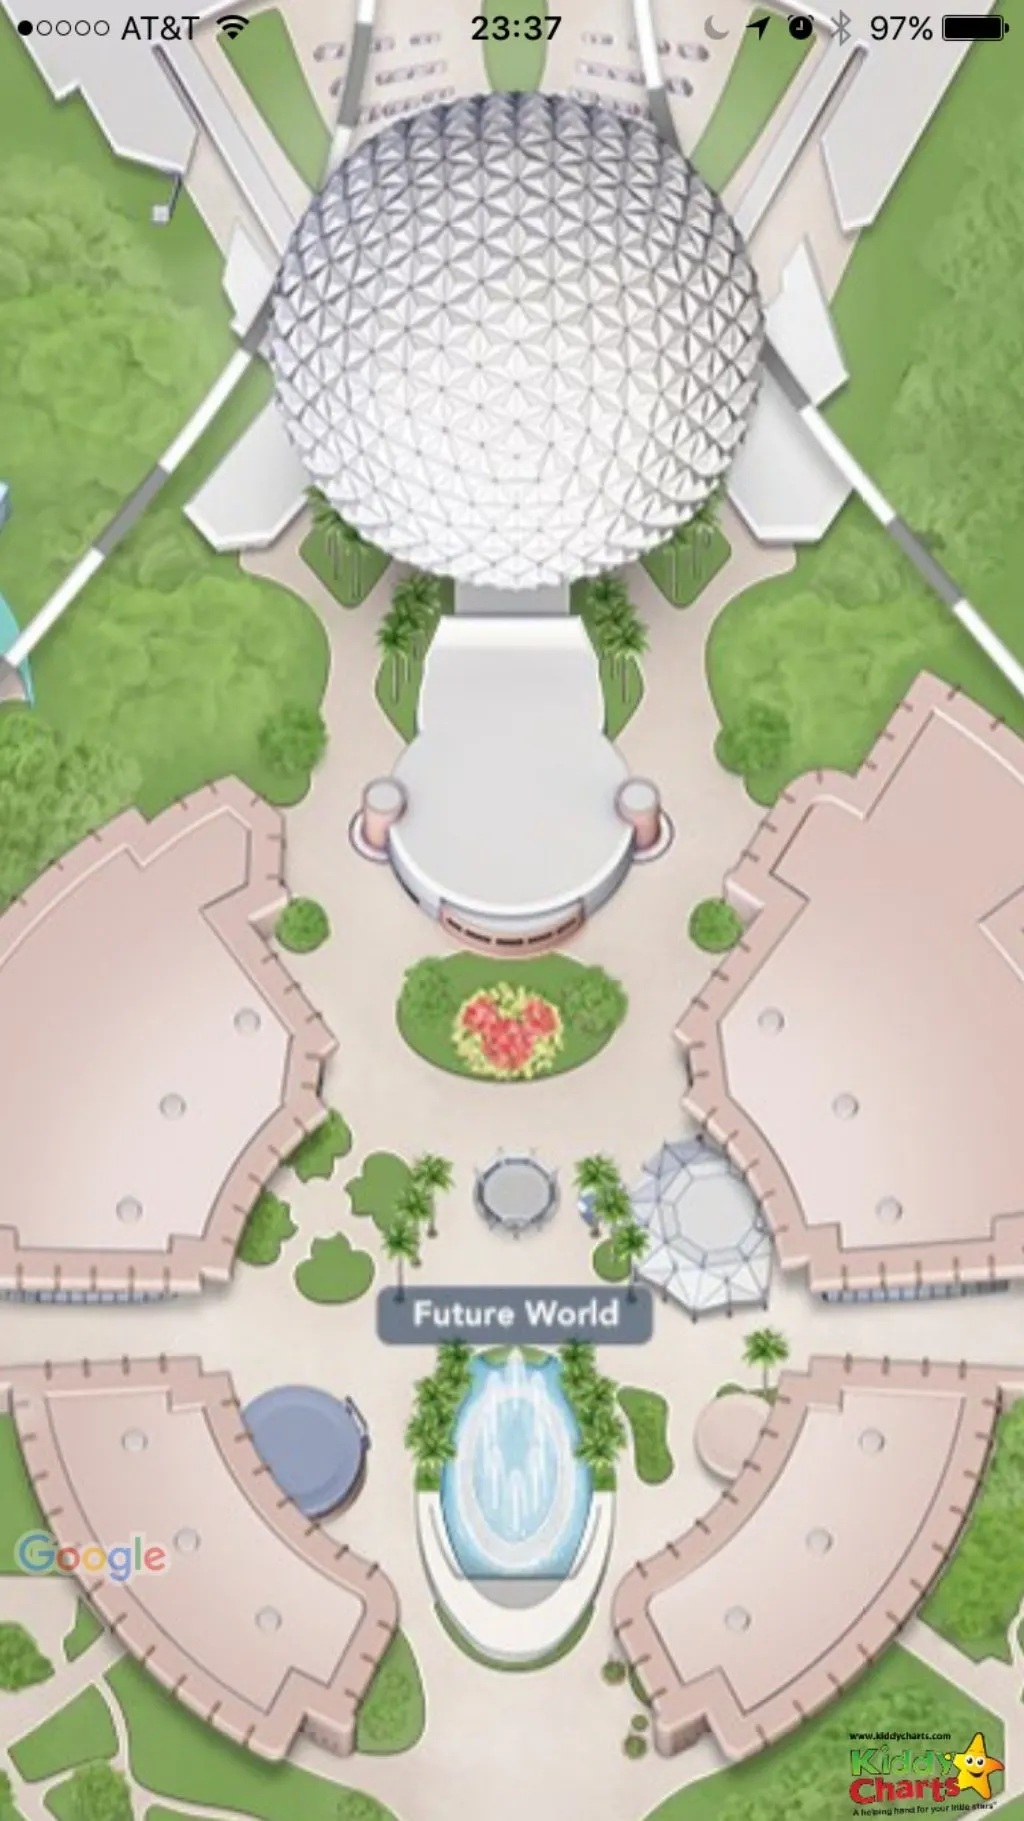 The Epcot map within the app is another location for one of our best hidden mickeys in Walt Disney World - look at the flower bed! Find others in the article - you'll love looking we promise!